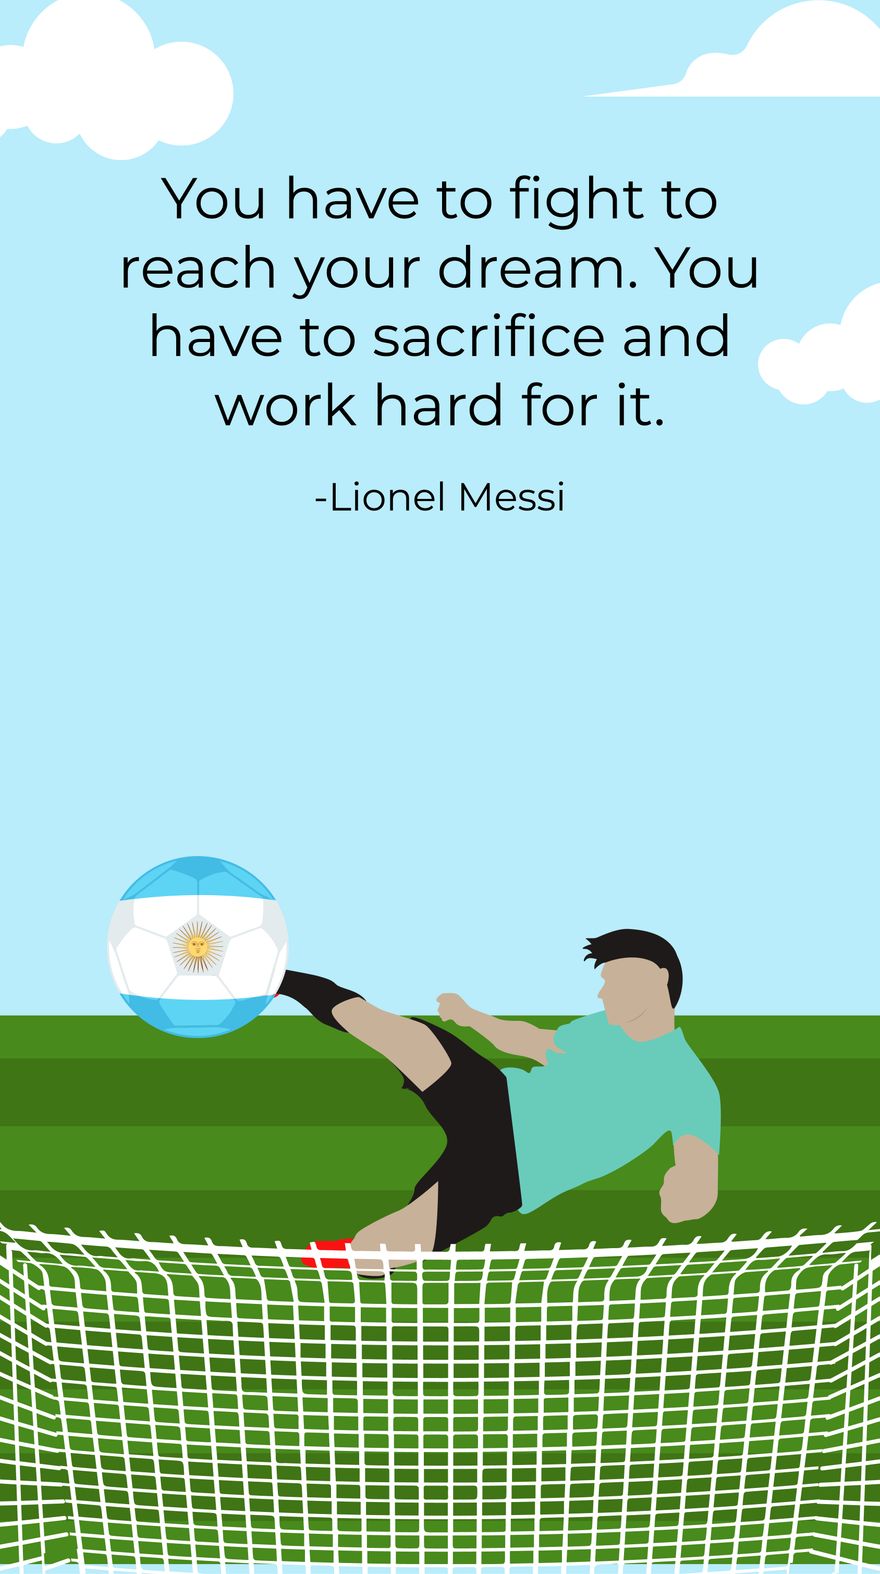 Free Lionel Messi - You have to fight to reach your dream. You have to sacrifice and work hard for it. in JPG